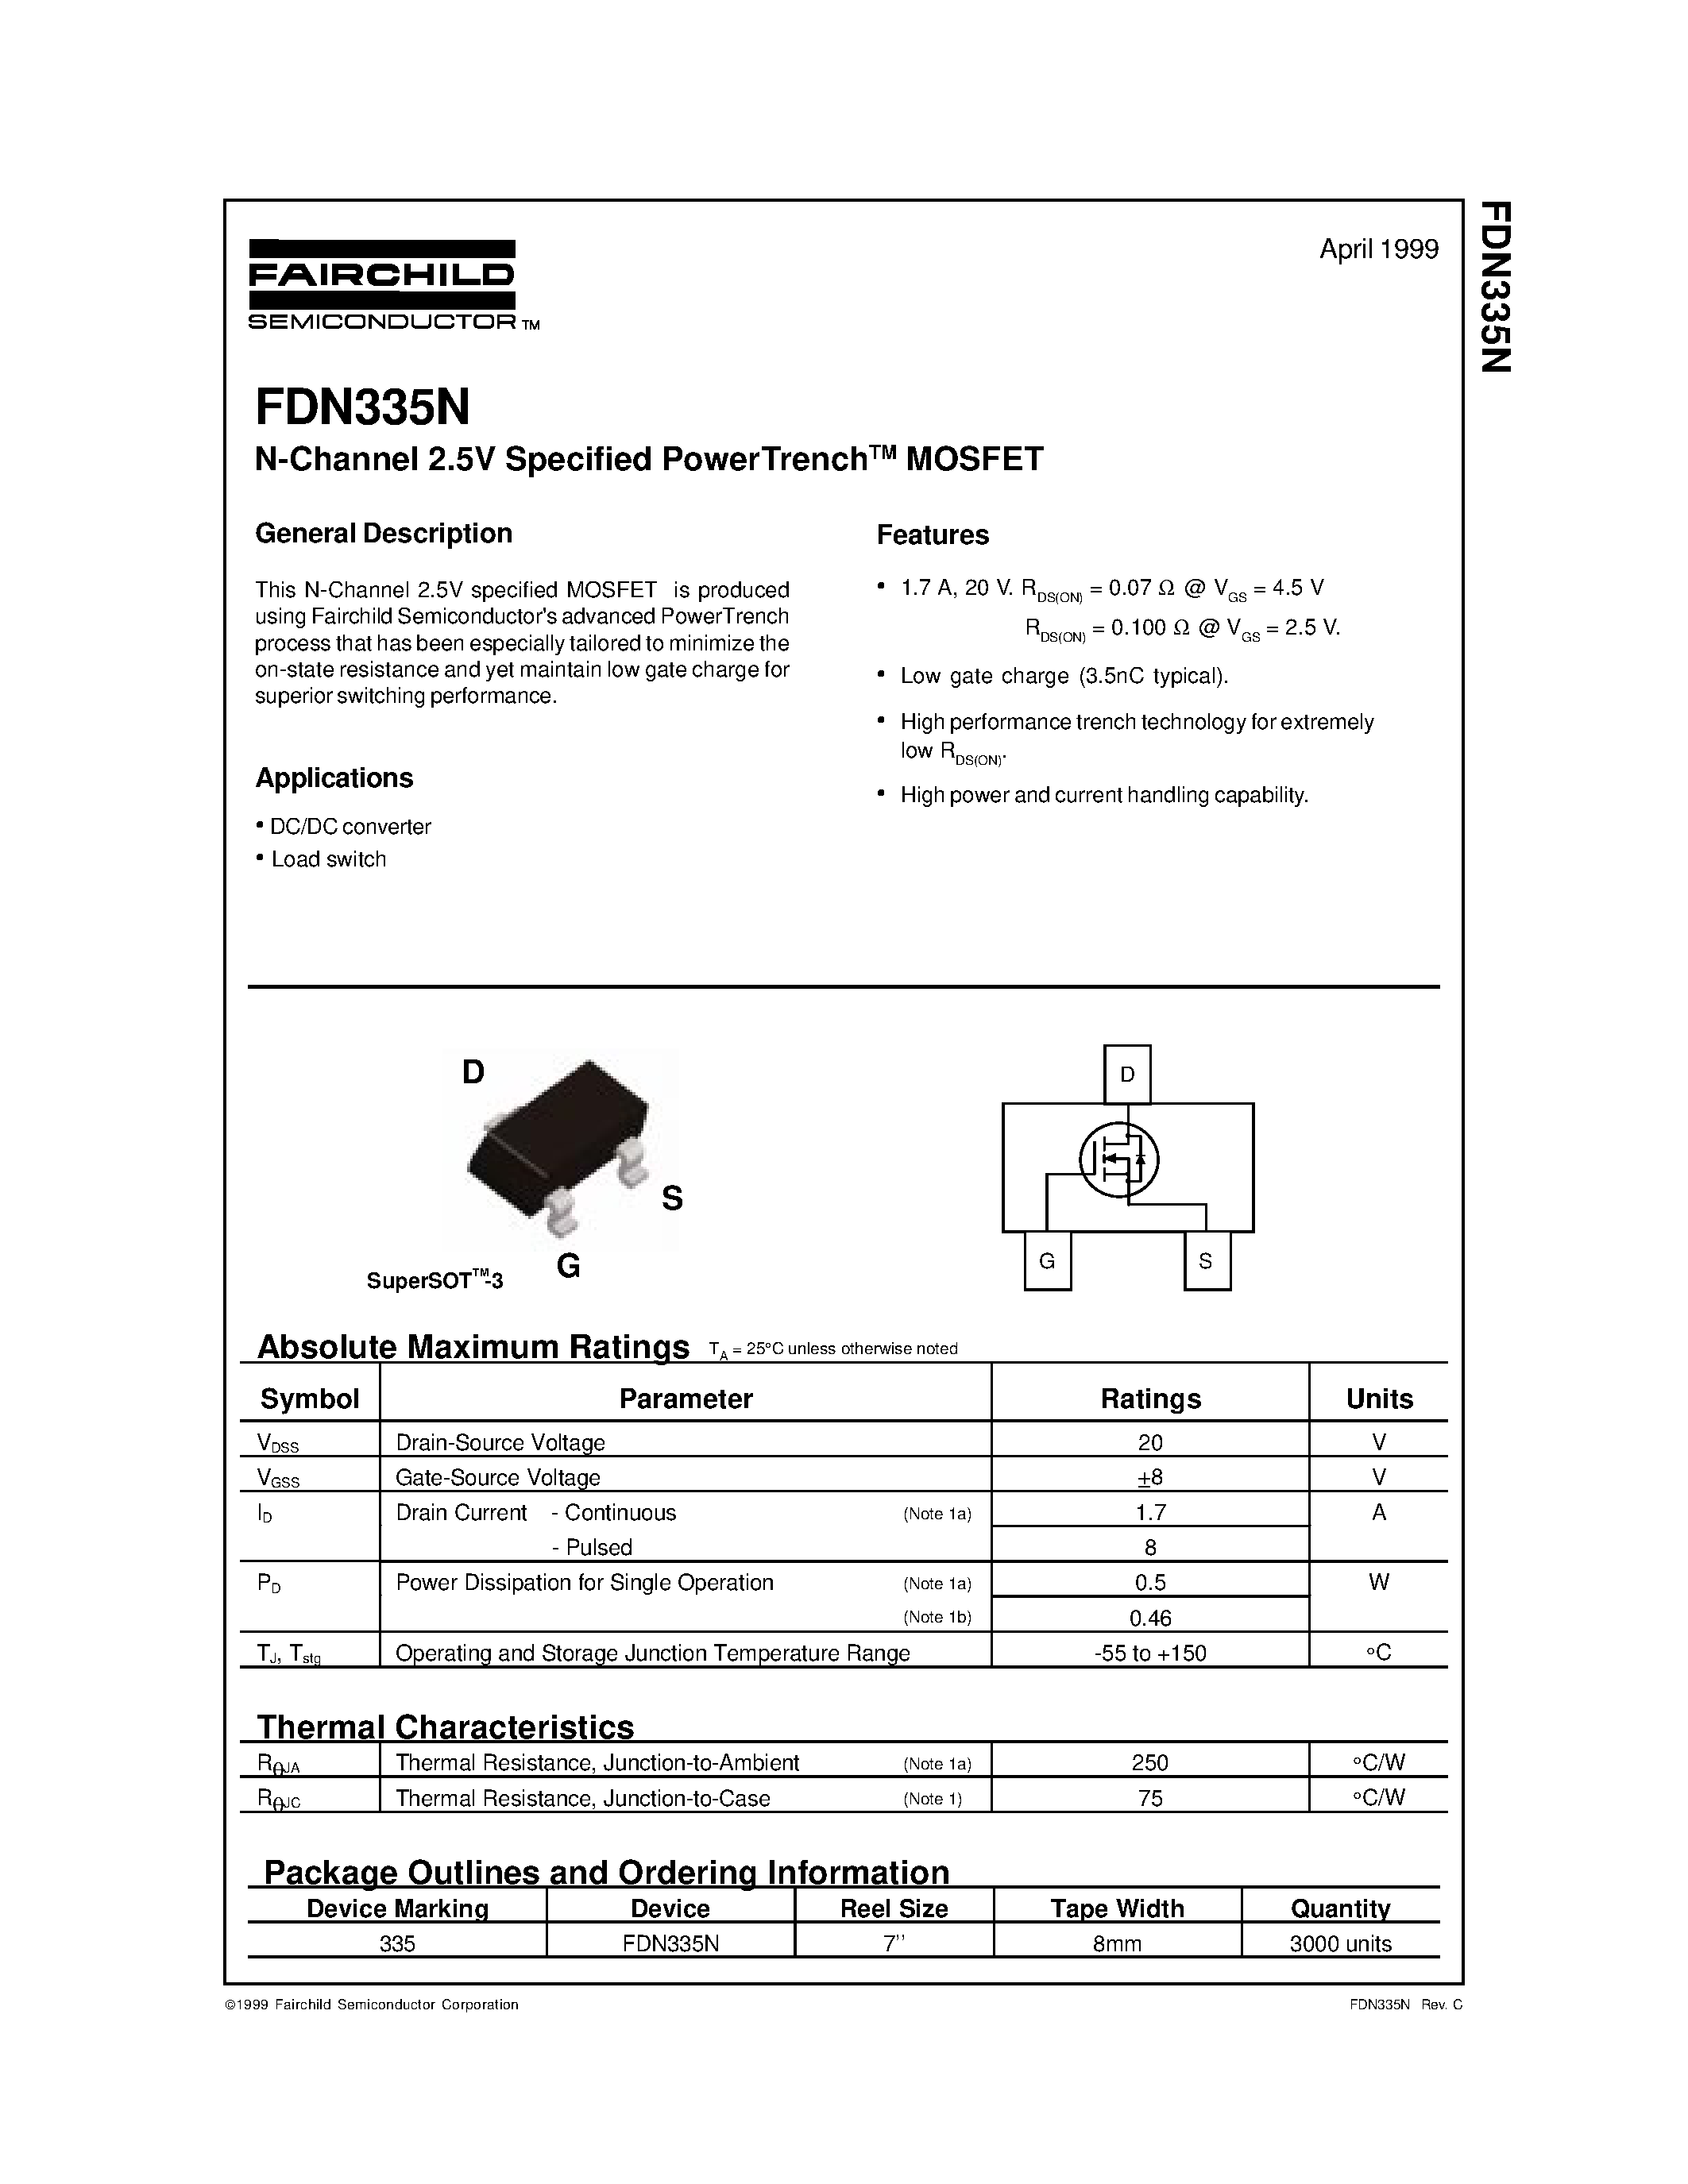 Даташит FDN335N - N-Channel 2.5V Specified PowerTrenchTM MOSFET страница 1